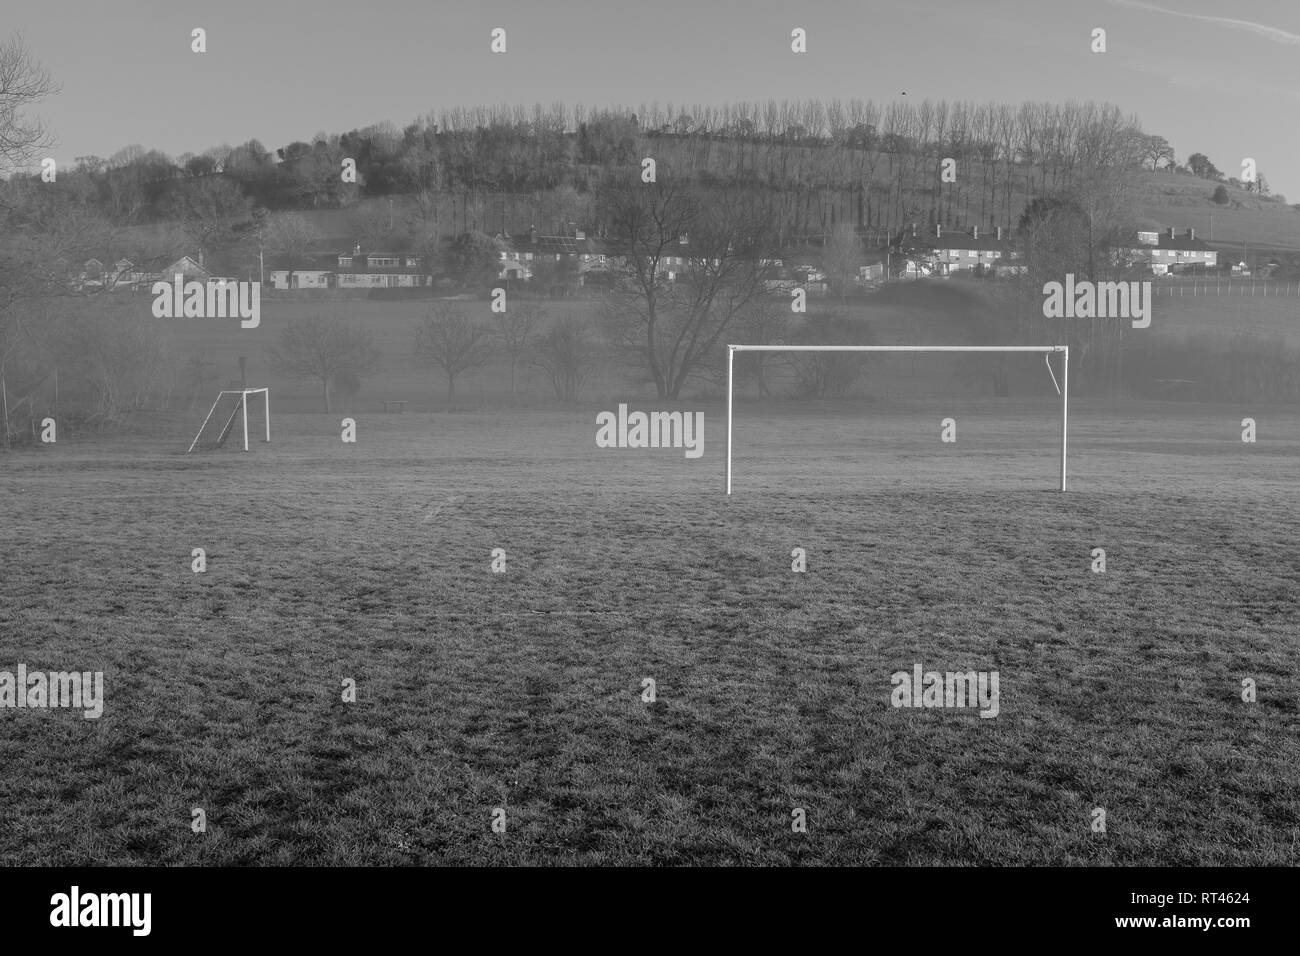 Empty village football field, small amount of fog drifting through, hill in the back ground with houses Stock Photo